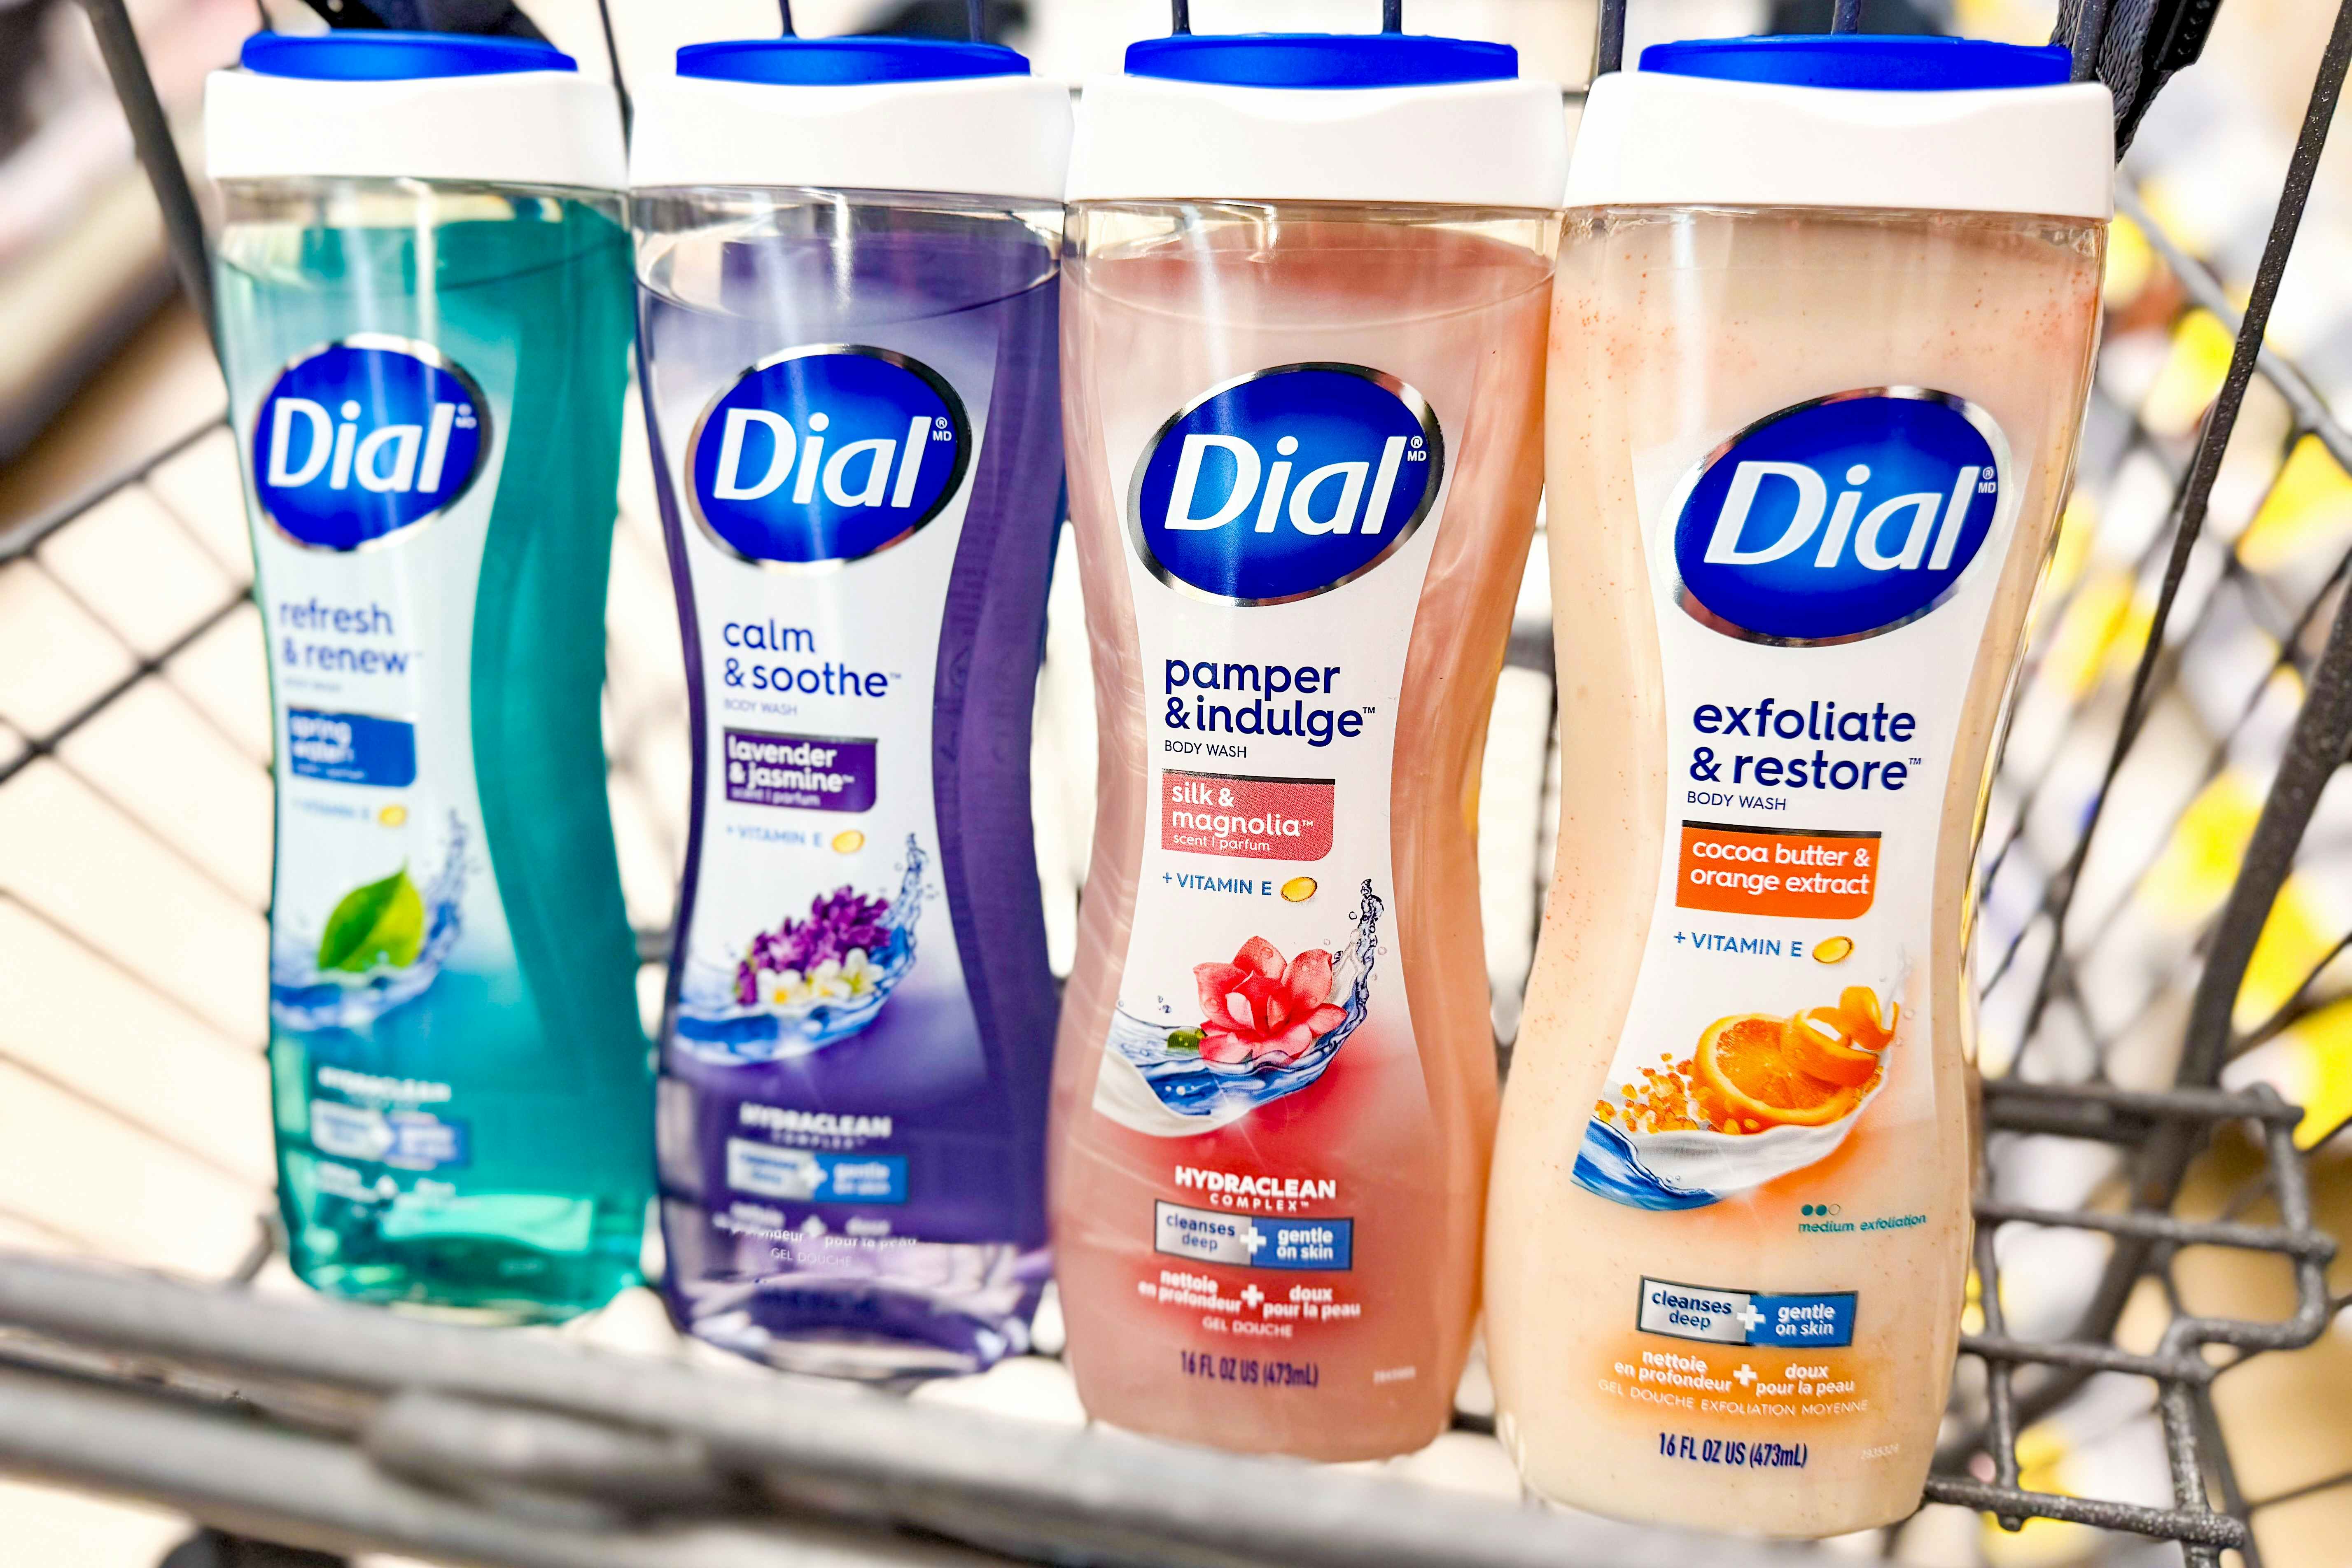 Rare Price Drop on Dial Body Wash — Just $1.42 Each at Walgreens